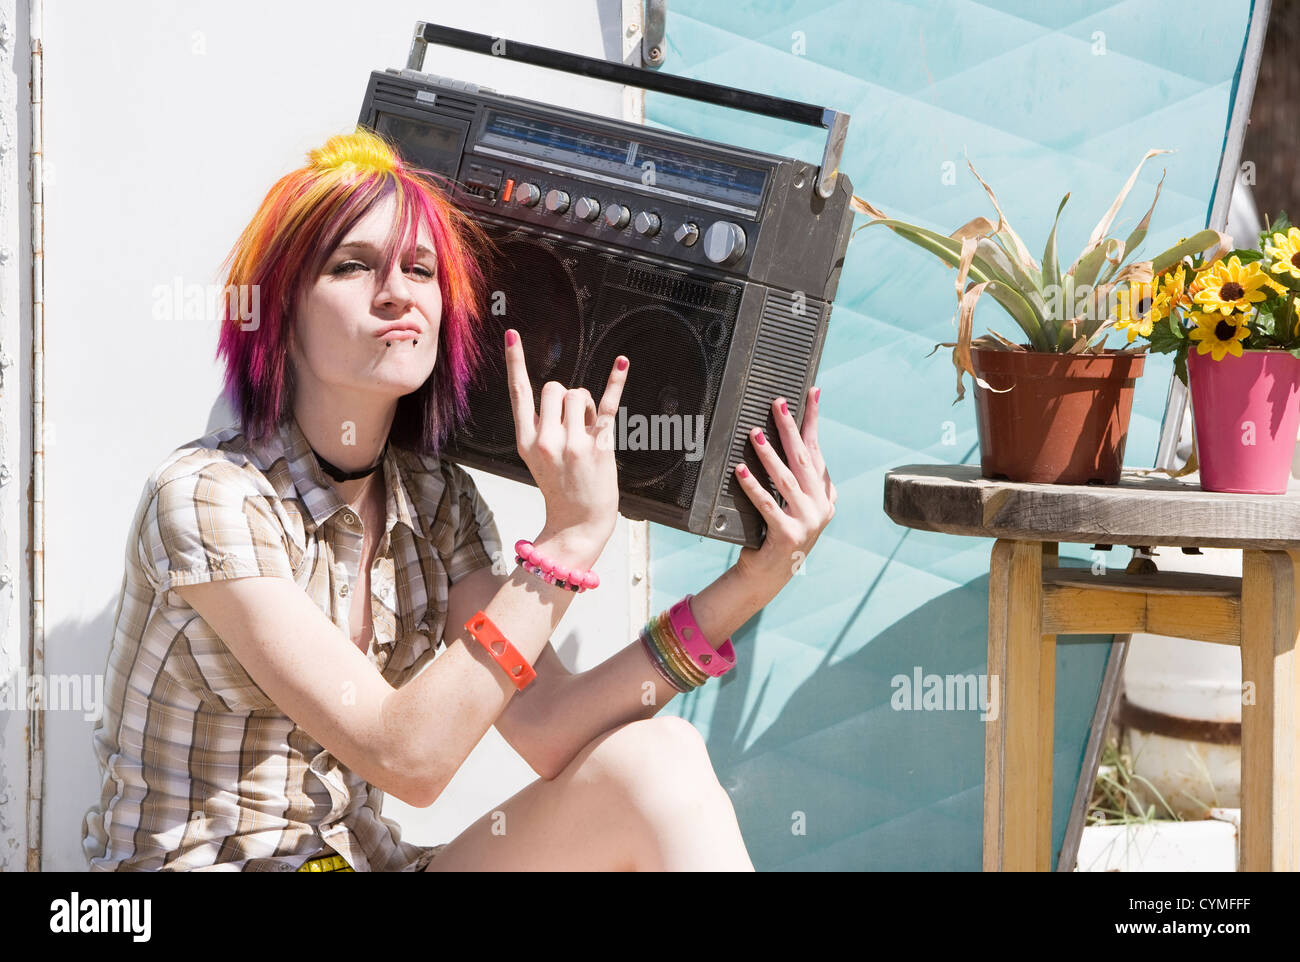 Punk girl with brightly colored hair sitting on trailer step holding boom box Stock Photo